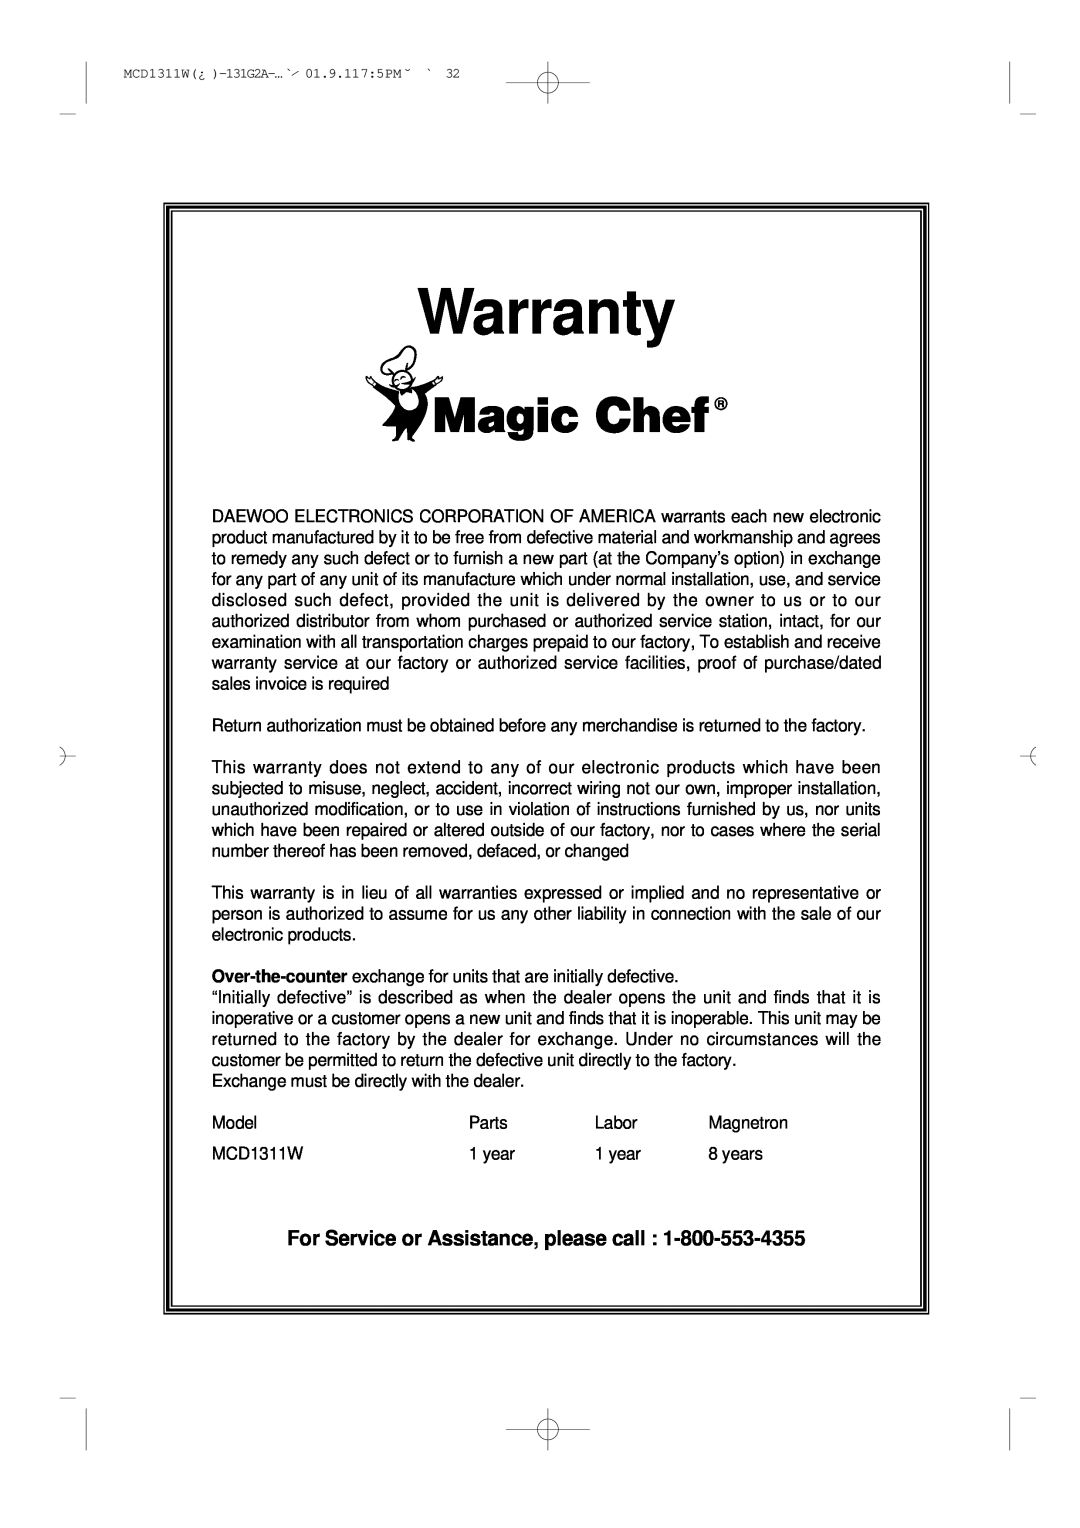 Magic Chef MCD1311W instruction manual For Service or Assistance, please call, Warranty 